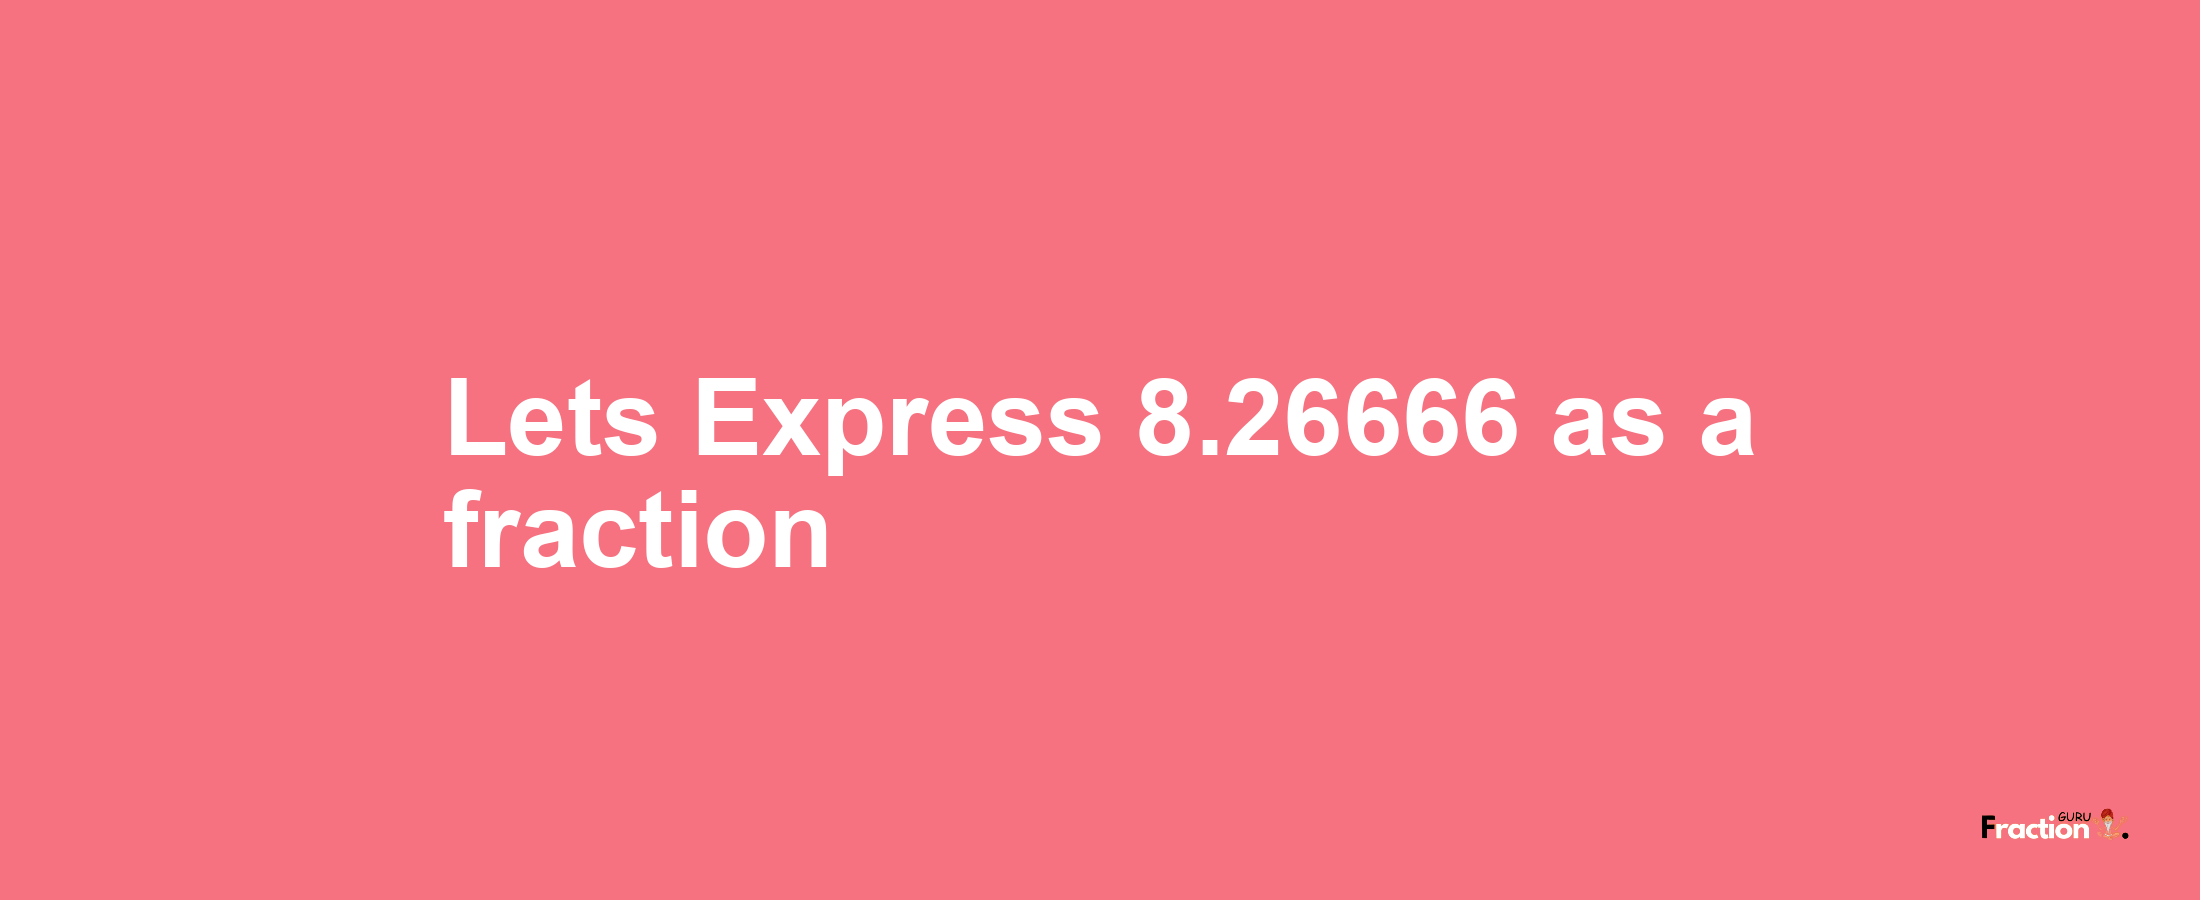 Lets Express 8.26666 as afraction